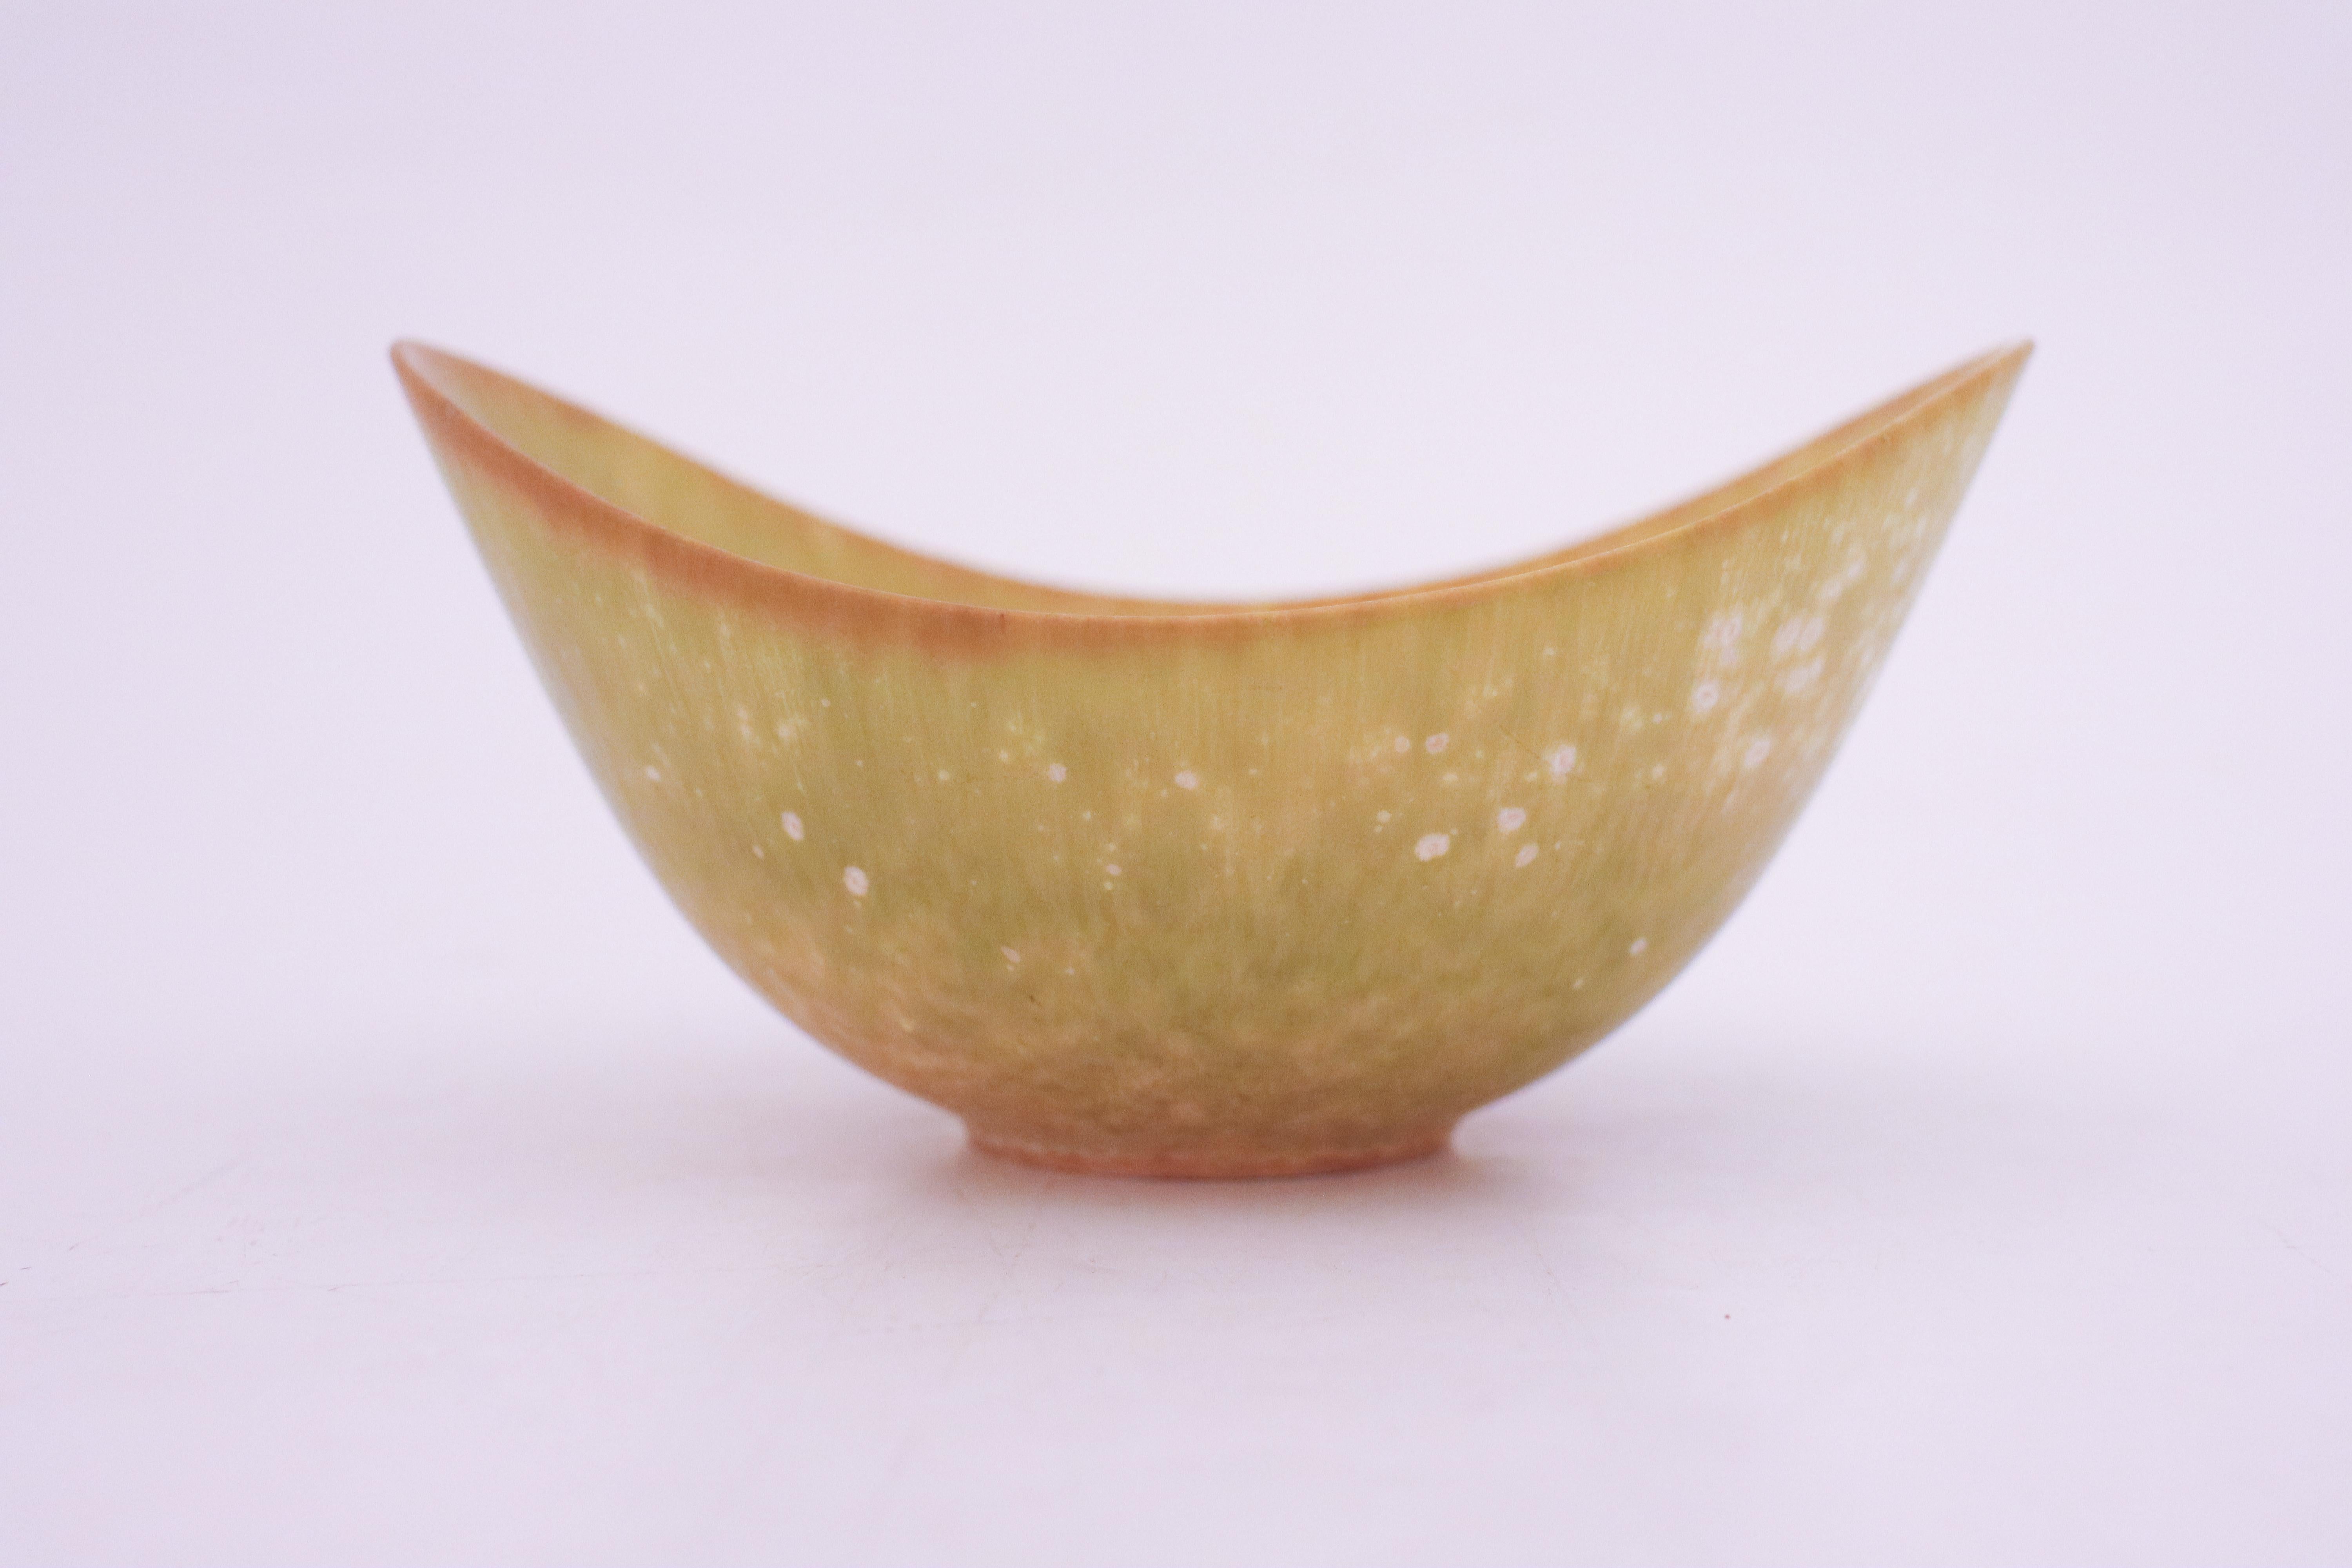 A lovely green bowl designed by Gunnar Nylund at Rörstrand, the bowl is 16 x 12.5 cm (6.4